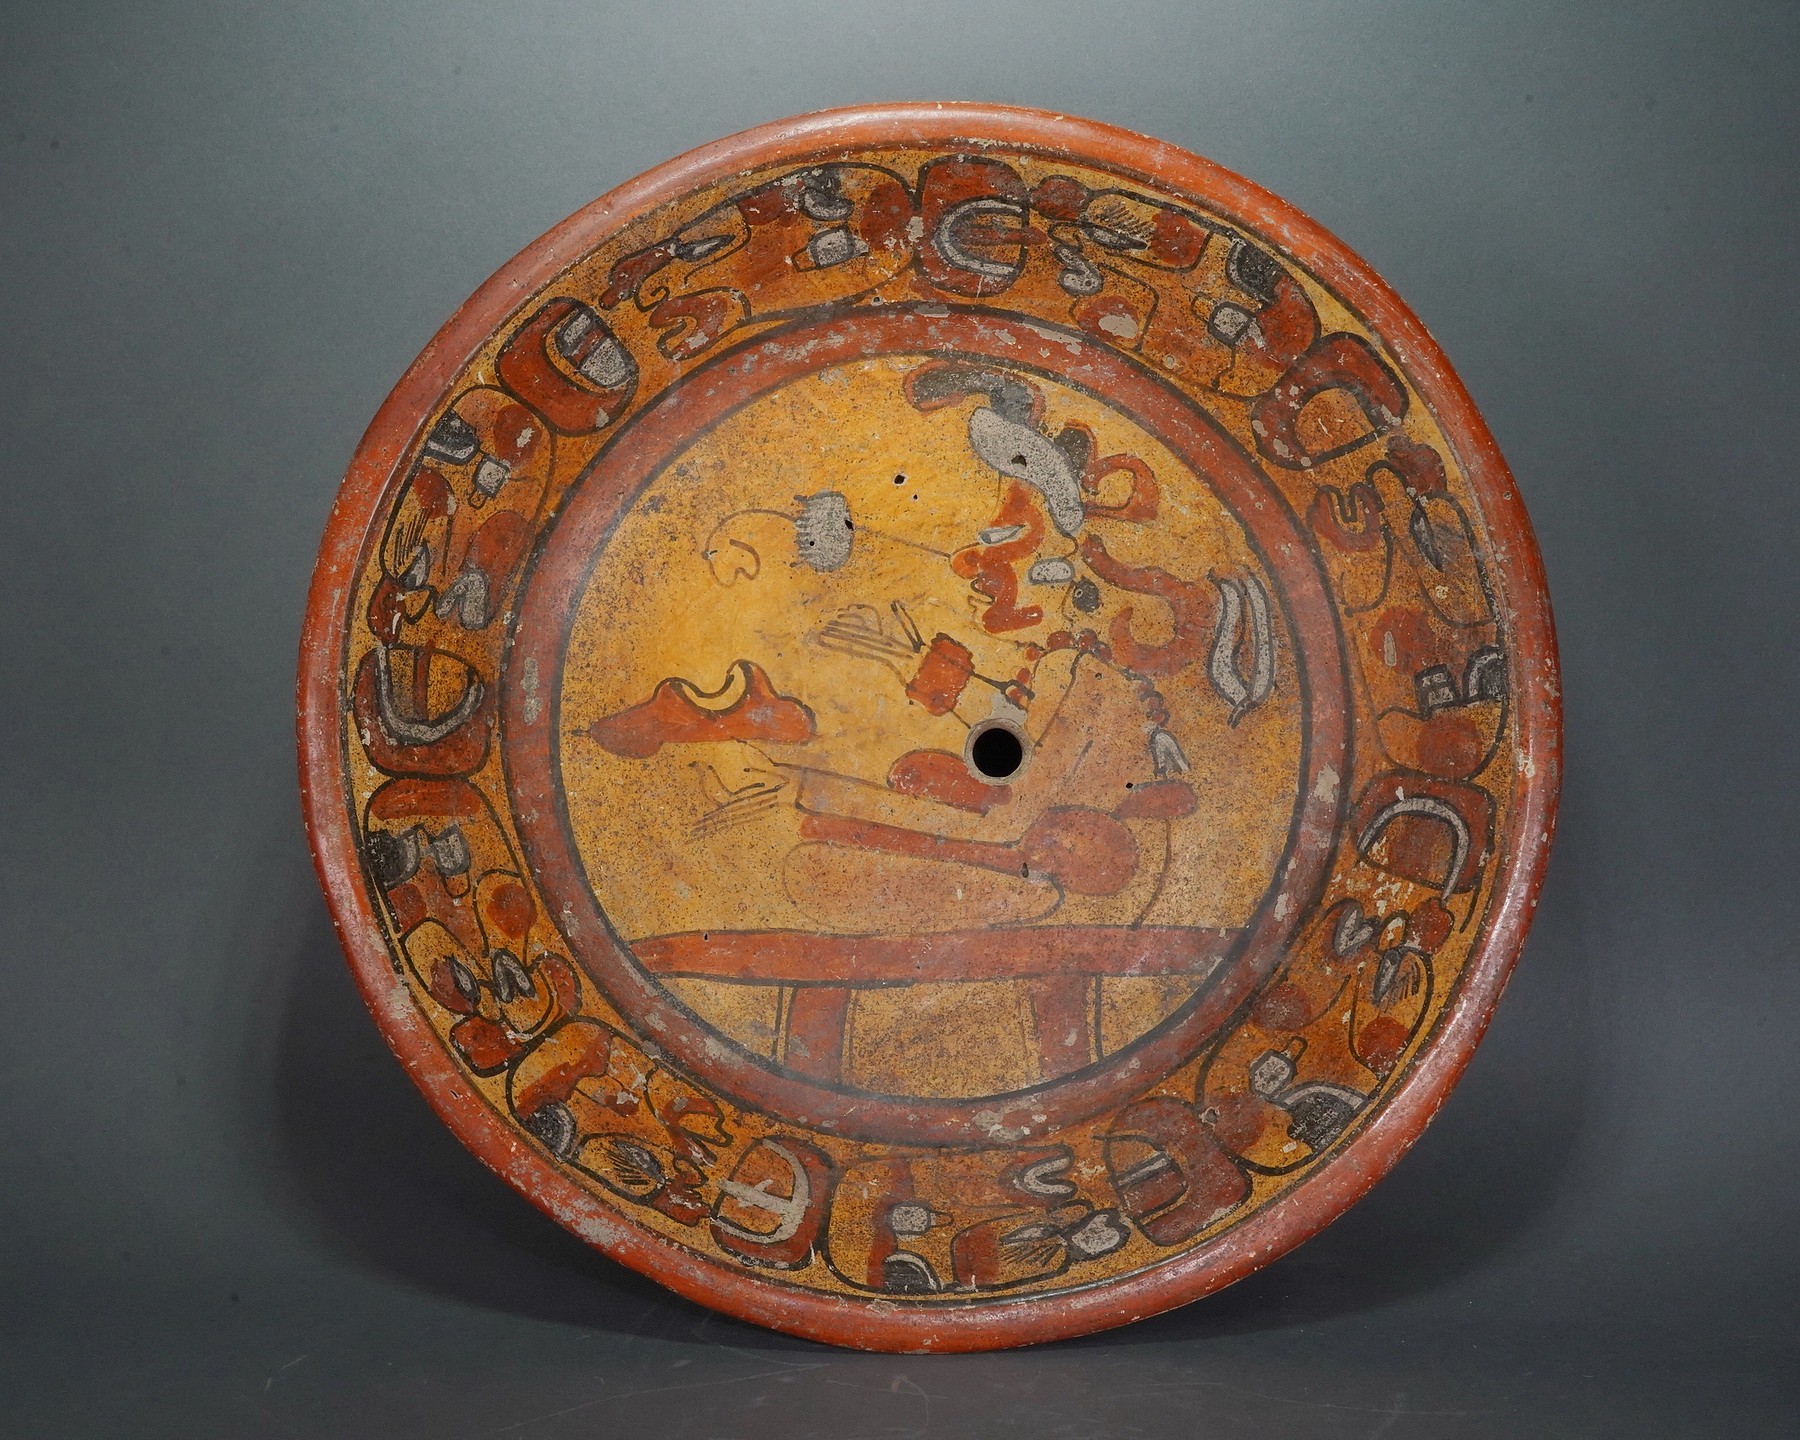 Guatemala, Mayan Tripod Dish with Seated Figure
This painted Mayan tripod dish features eight repeating  glyphs of deity heads in profile painted around the inside  edge.  The central seated figure is likelay shaman.  He is  holding two birds, which represent communication.   There is a "kill hole" in the center of the dish.  The back of the dish is painted with scallop design.  Formelry in the collection of Hiroshi Muira, Tokyo, Japan, prior to 1980.
Media: Ceramic
Dimensions: Diameter: 11" X Height: 3 1/2"
$3,750
n6012B